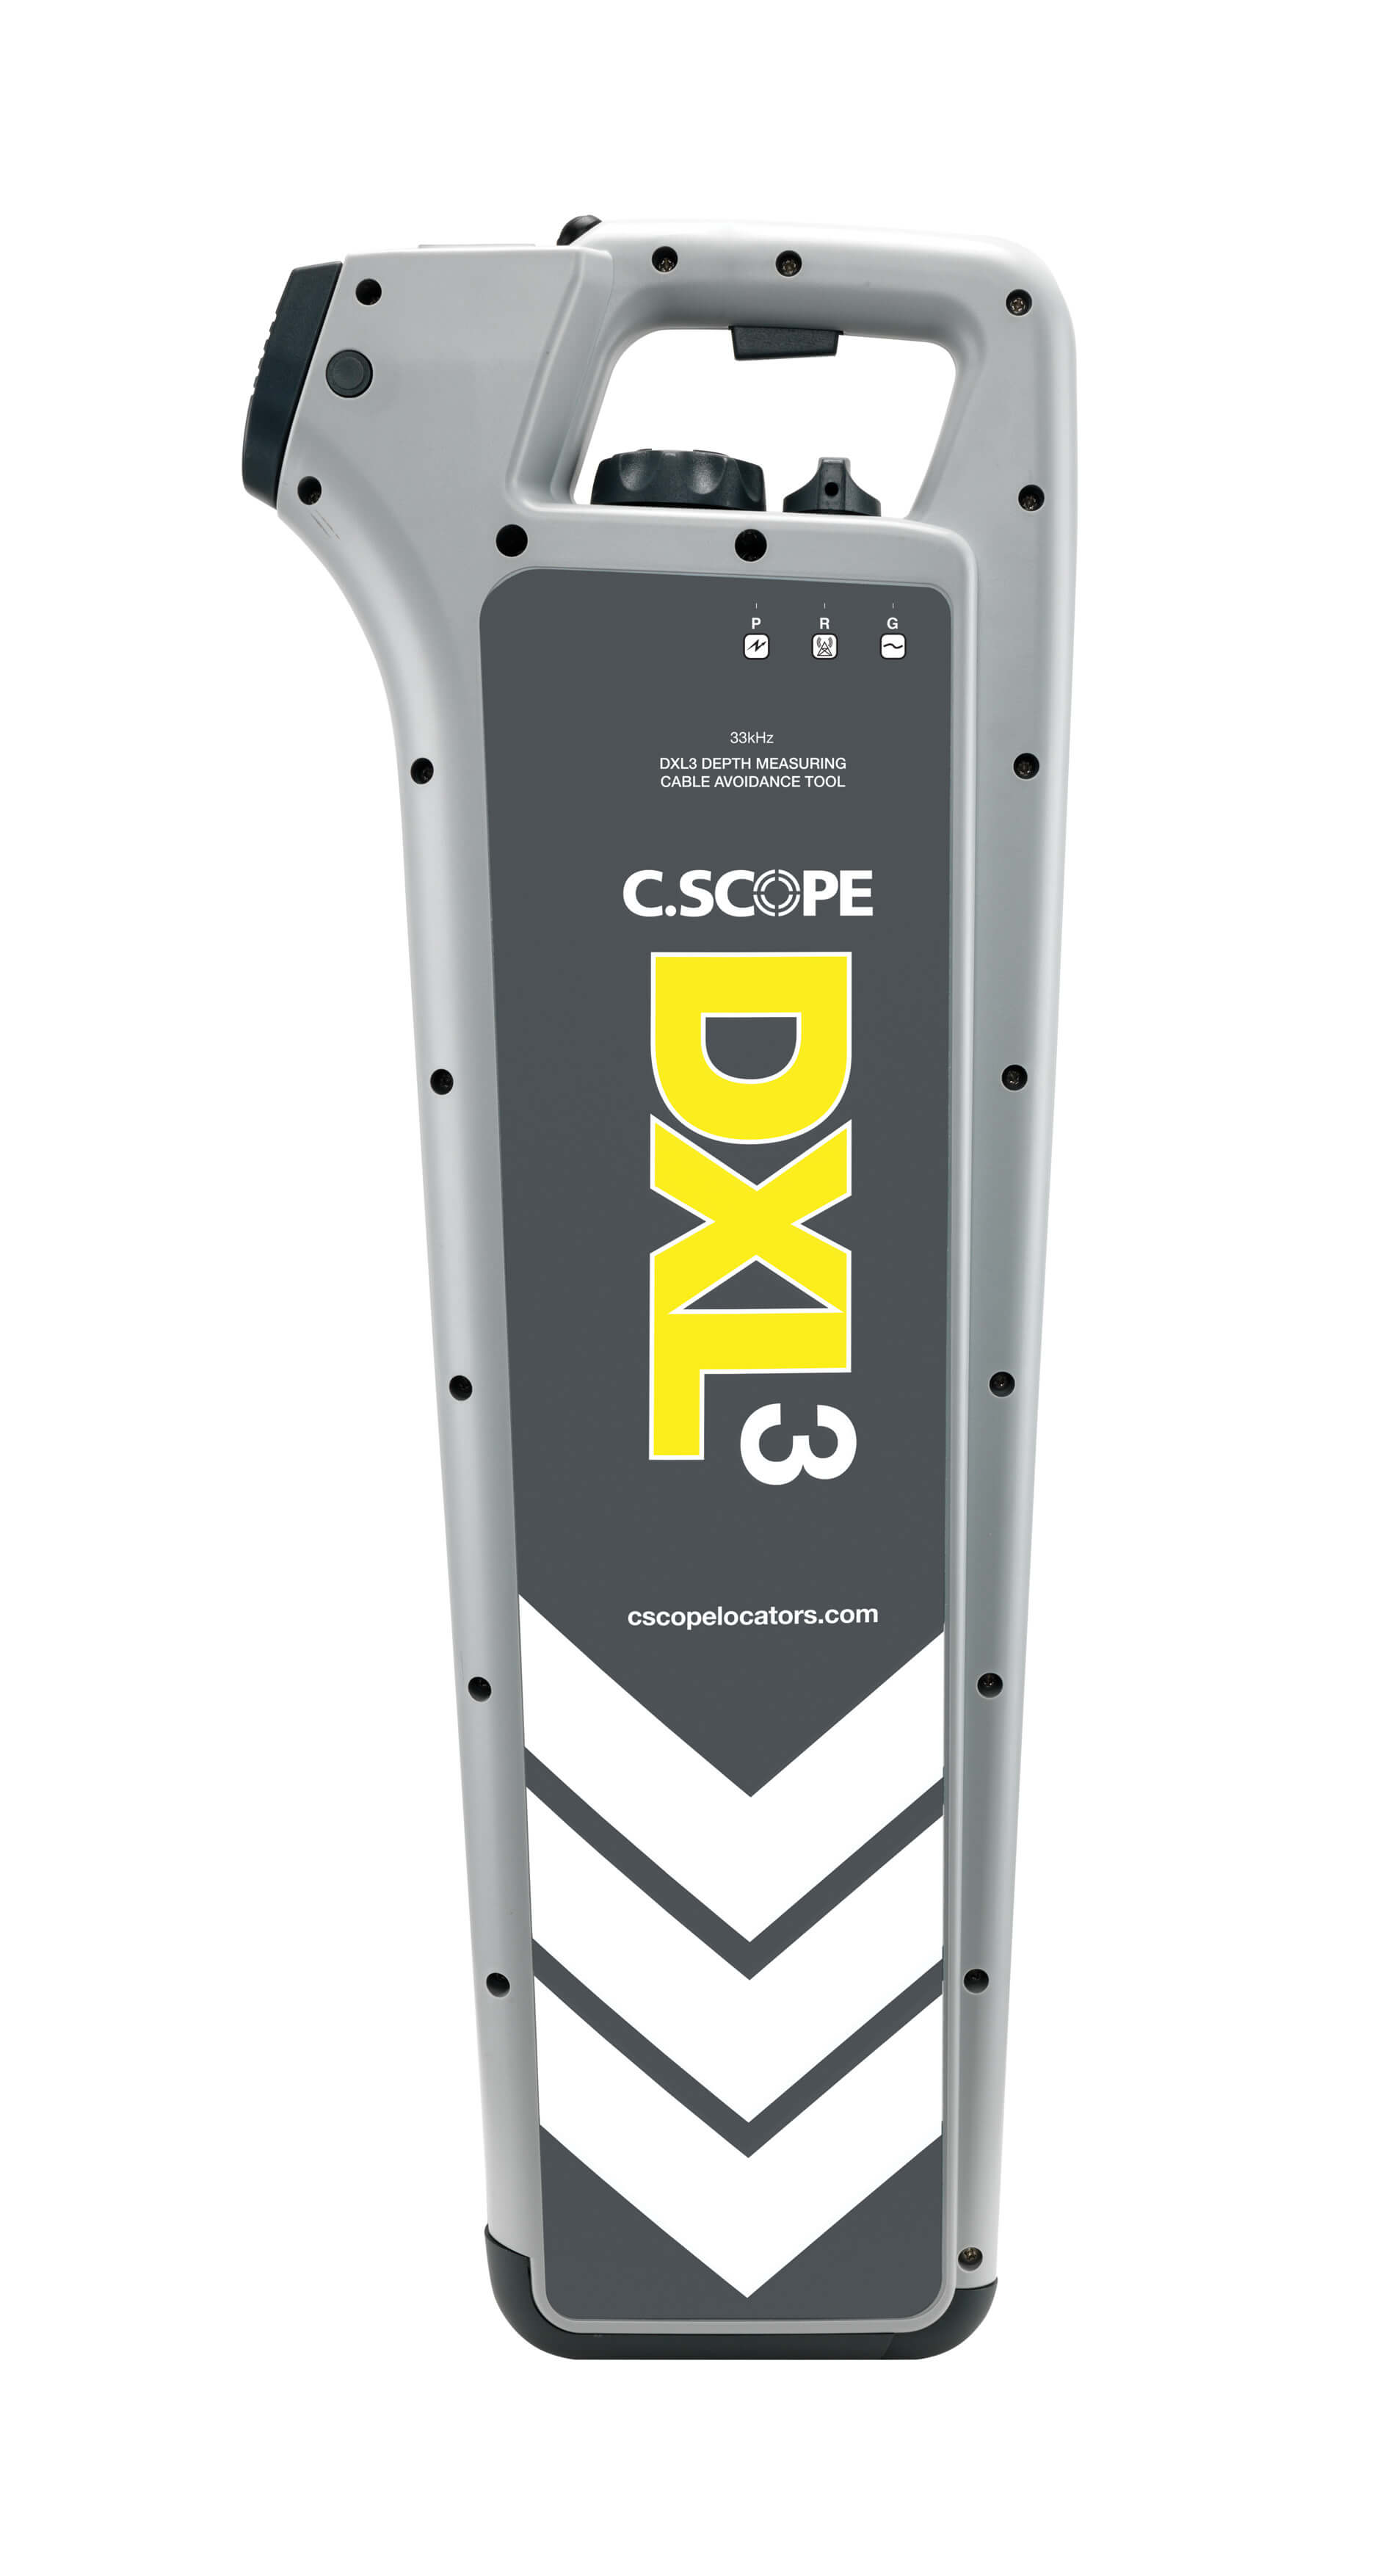 C.Scope DXL3 Cable Avoidance Tool with Depth - Cable Detector Calibration & Sales